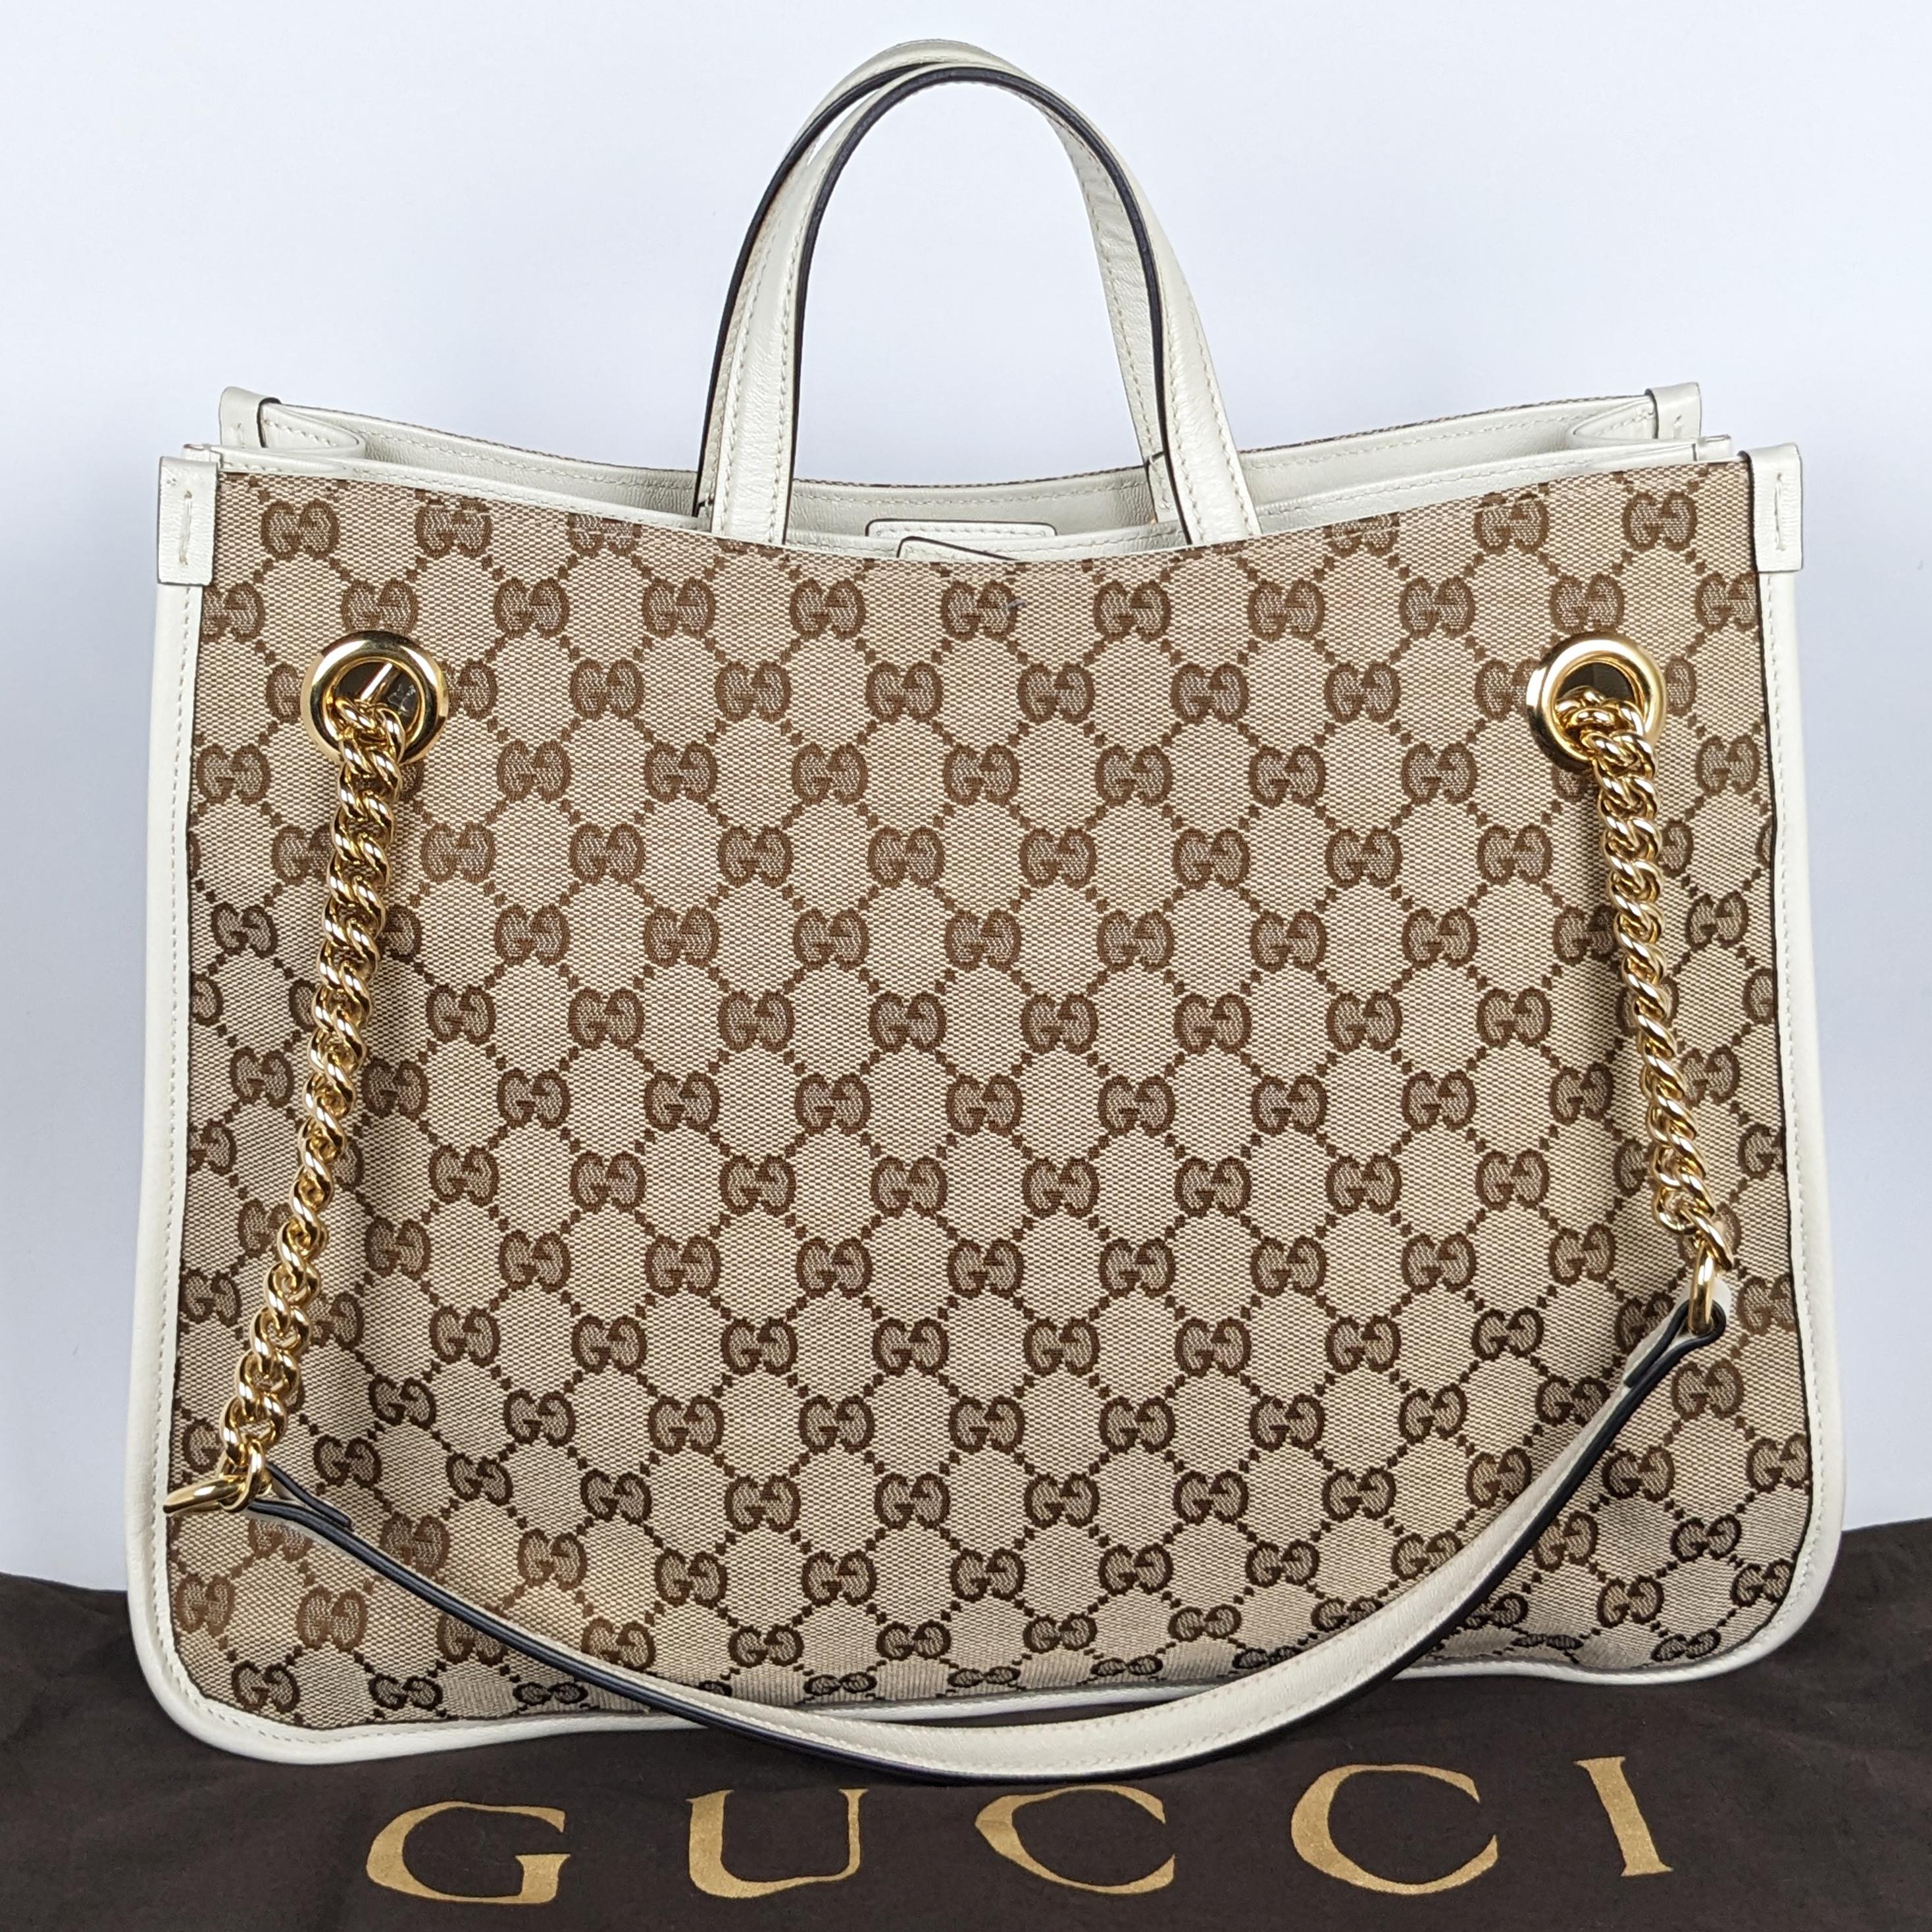 Condition: This authentic Gucci bag is in great pre-loved condition. There are faint marks on the leather on the bottom of the bag and light scratches on the hardware.

Est. Retail: $2500

Includes: Dust bag

Features: Gold-tone hardware, magnetic